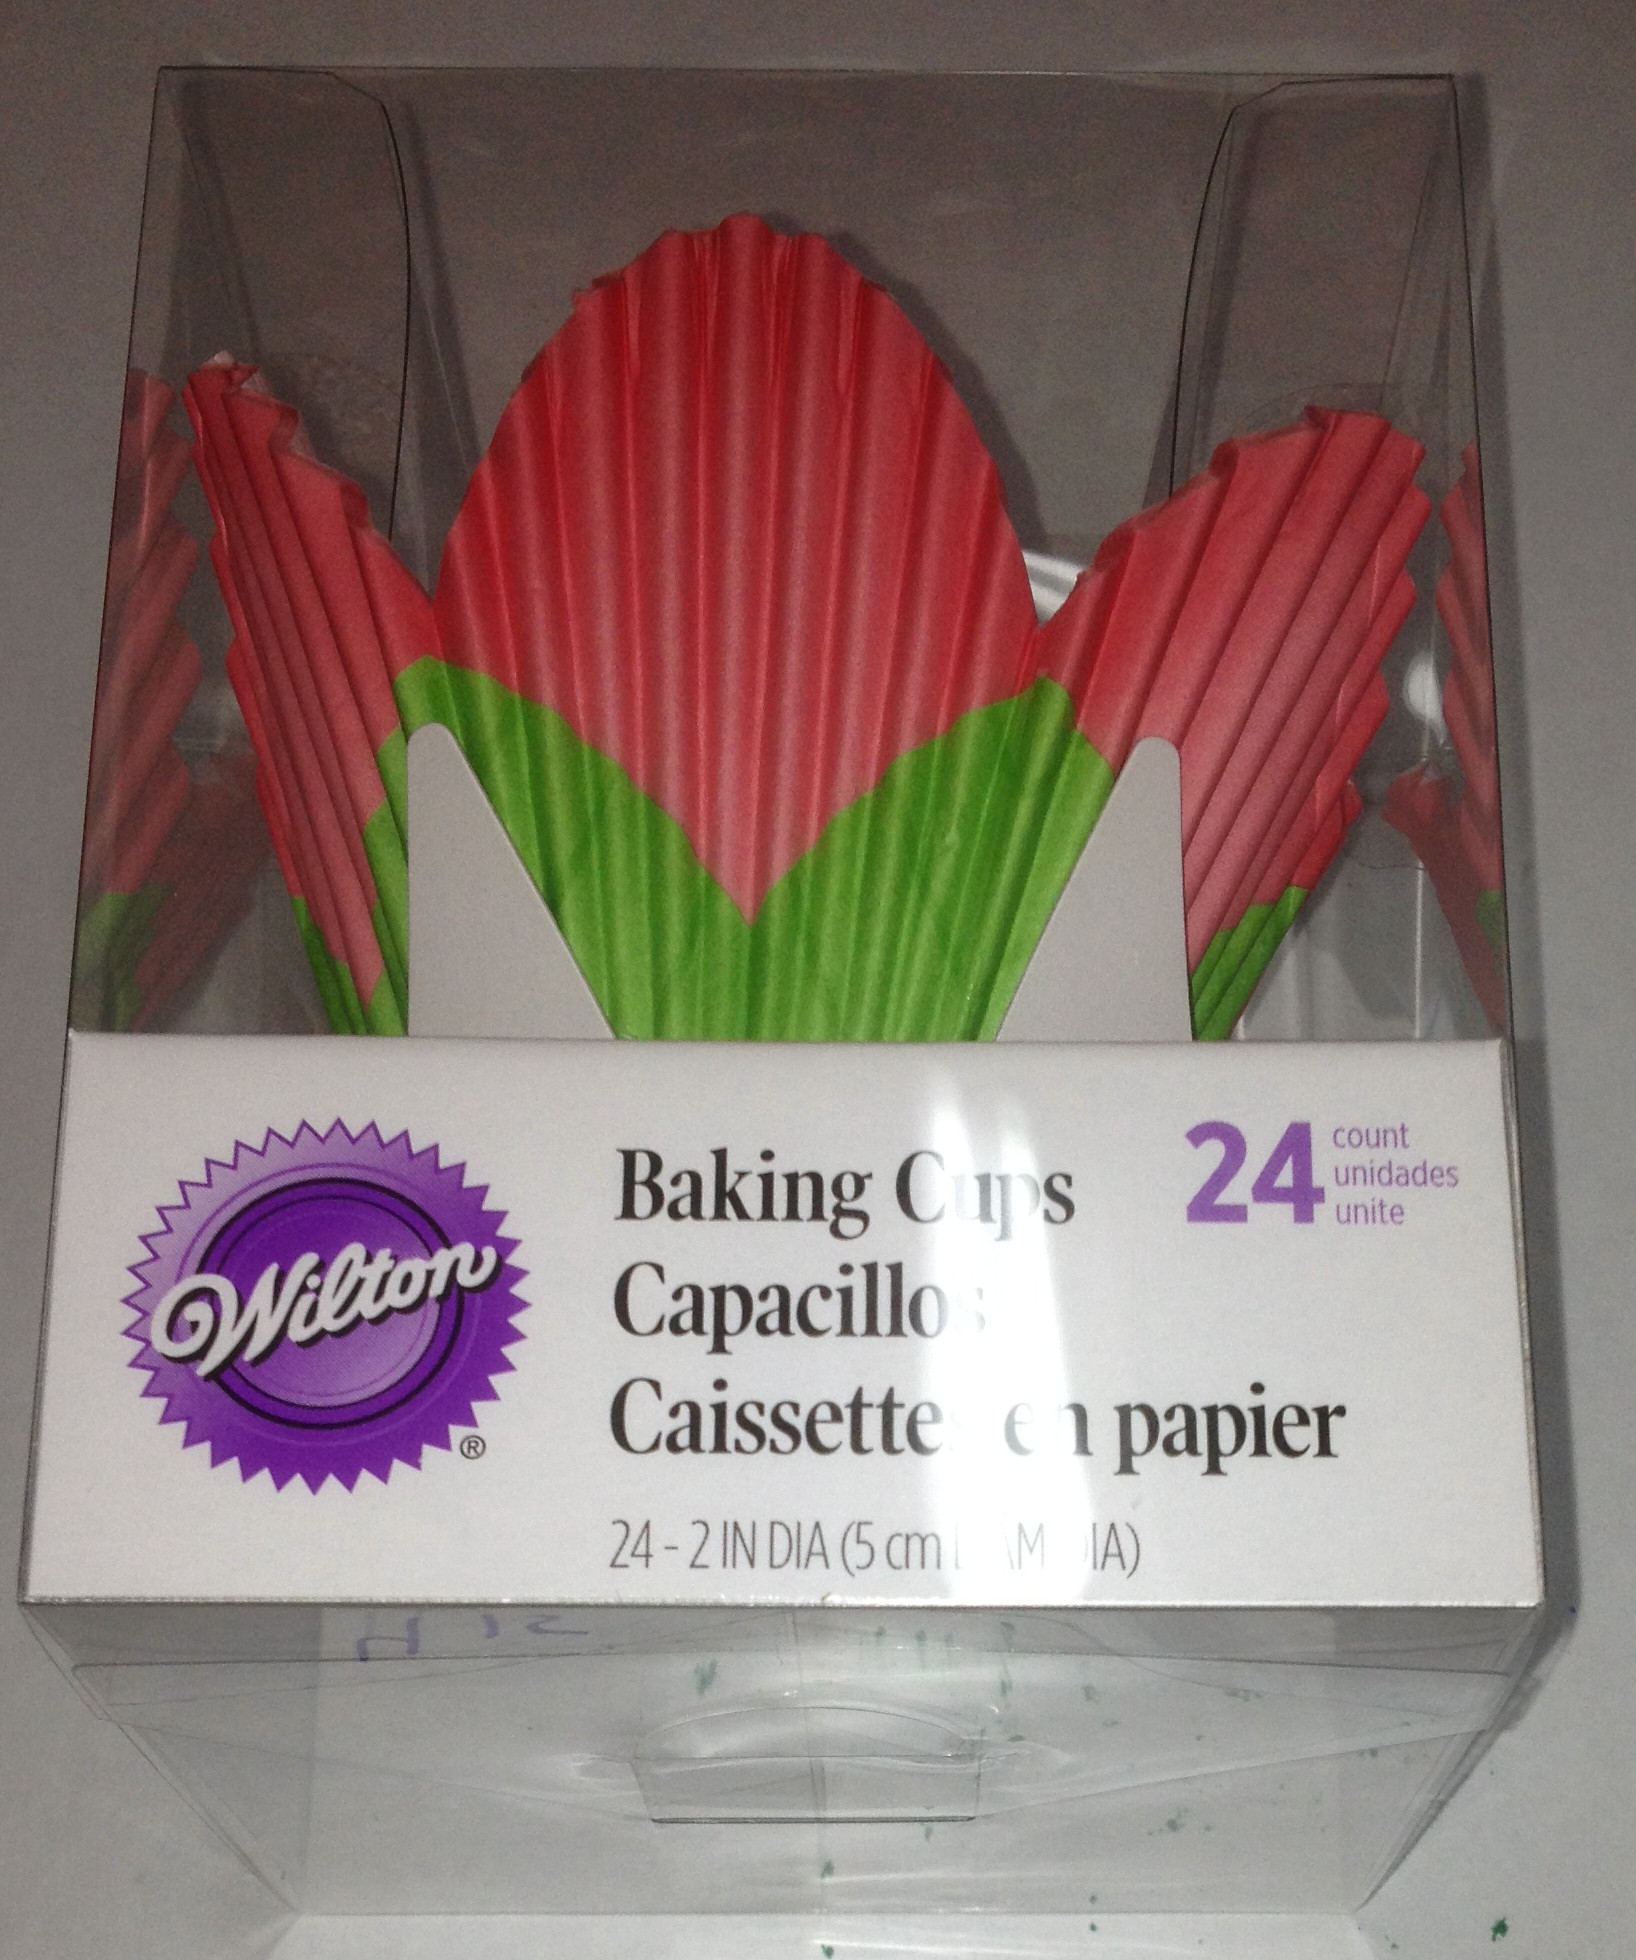 Baking Cups 24